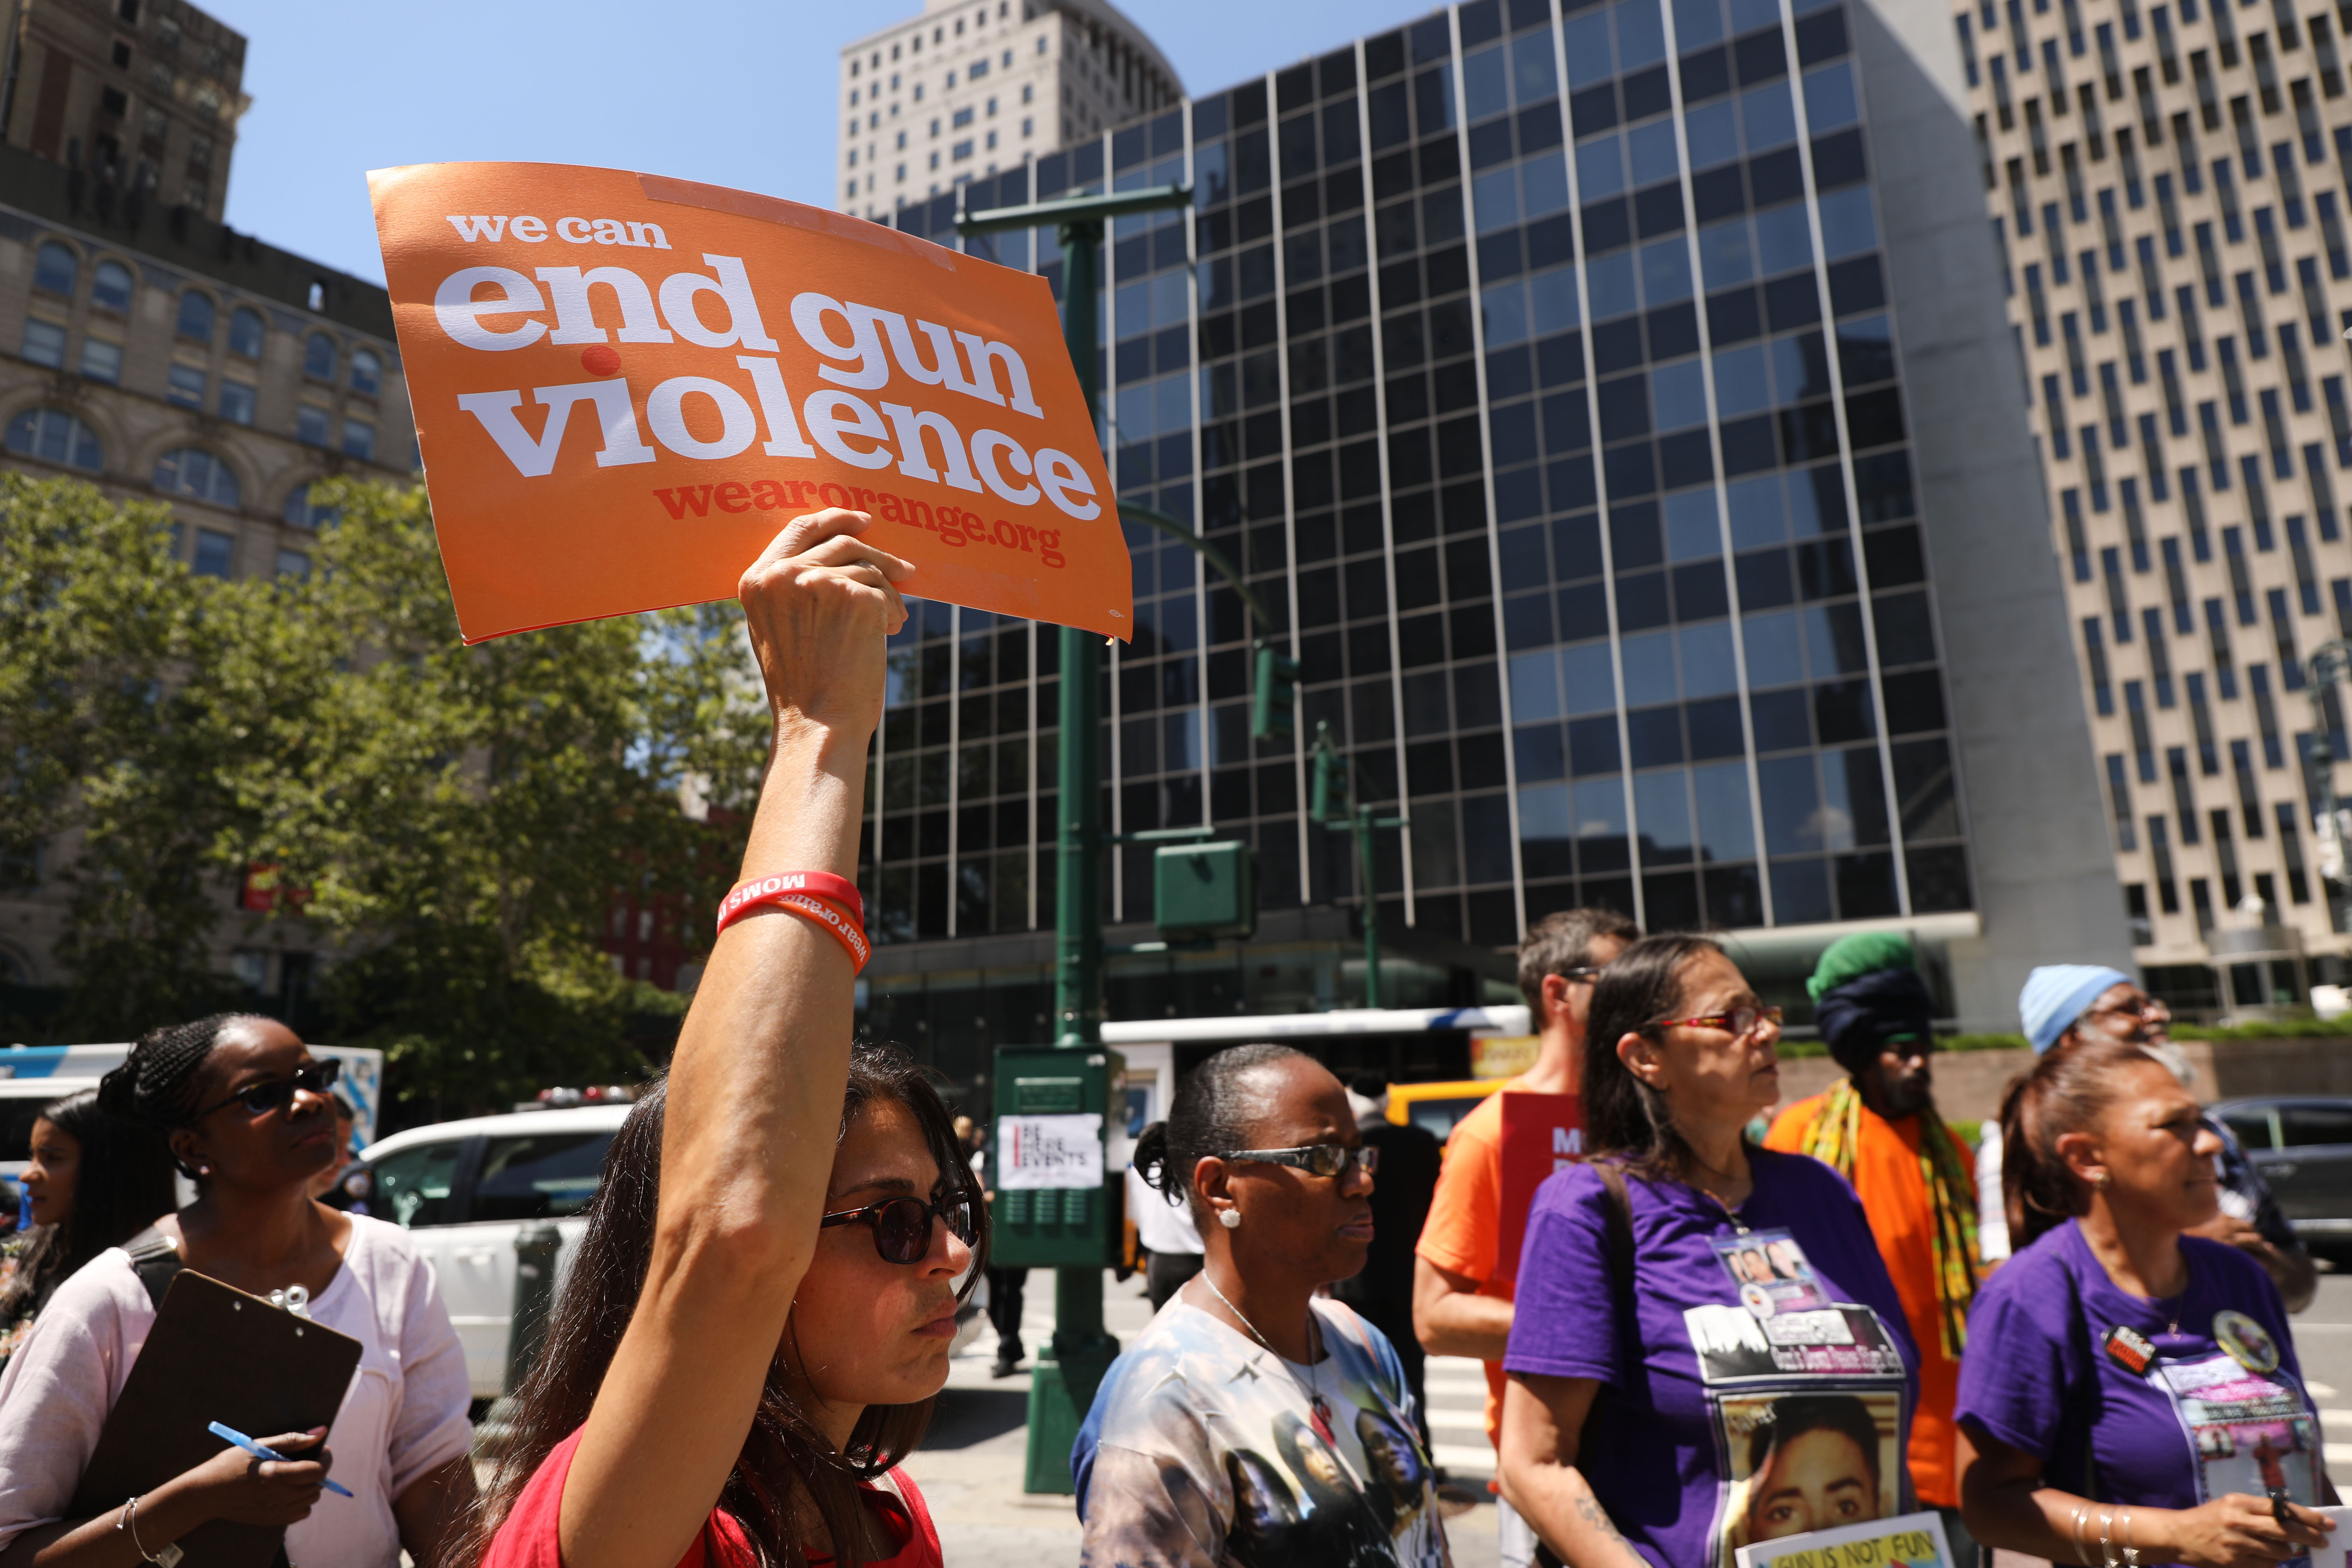 A person at a protest holds up a sign that reads, “End gun violence.”